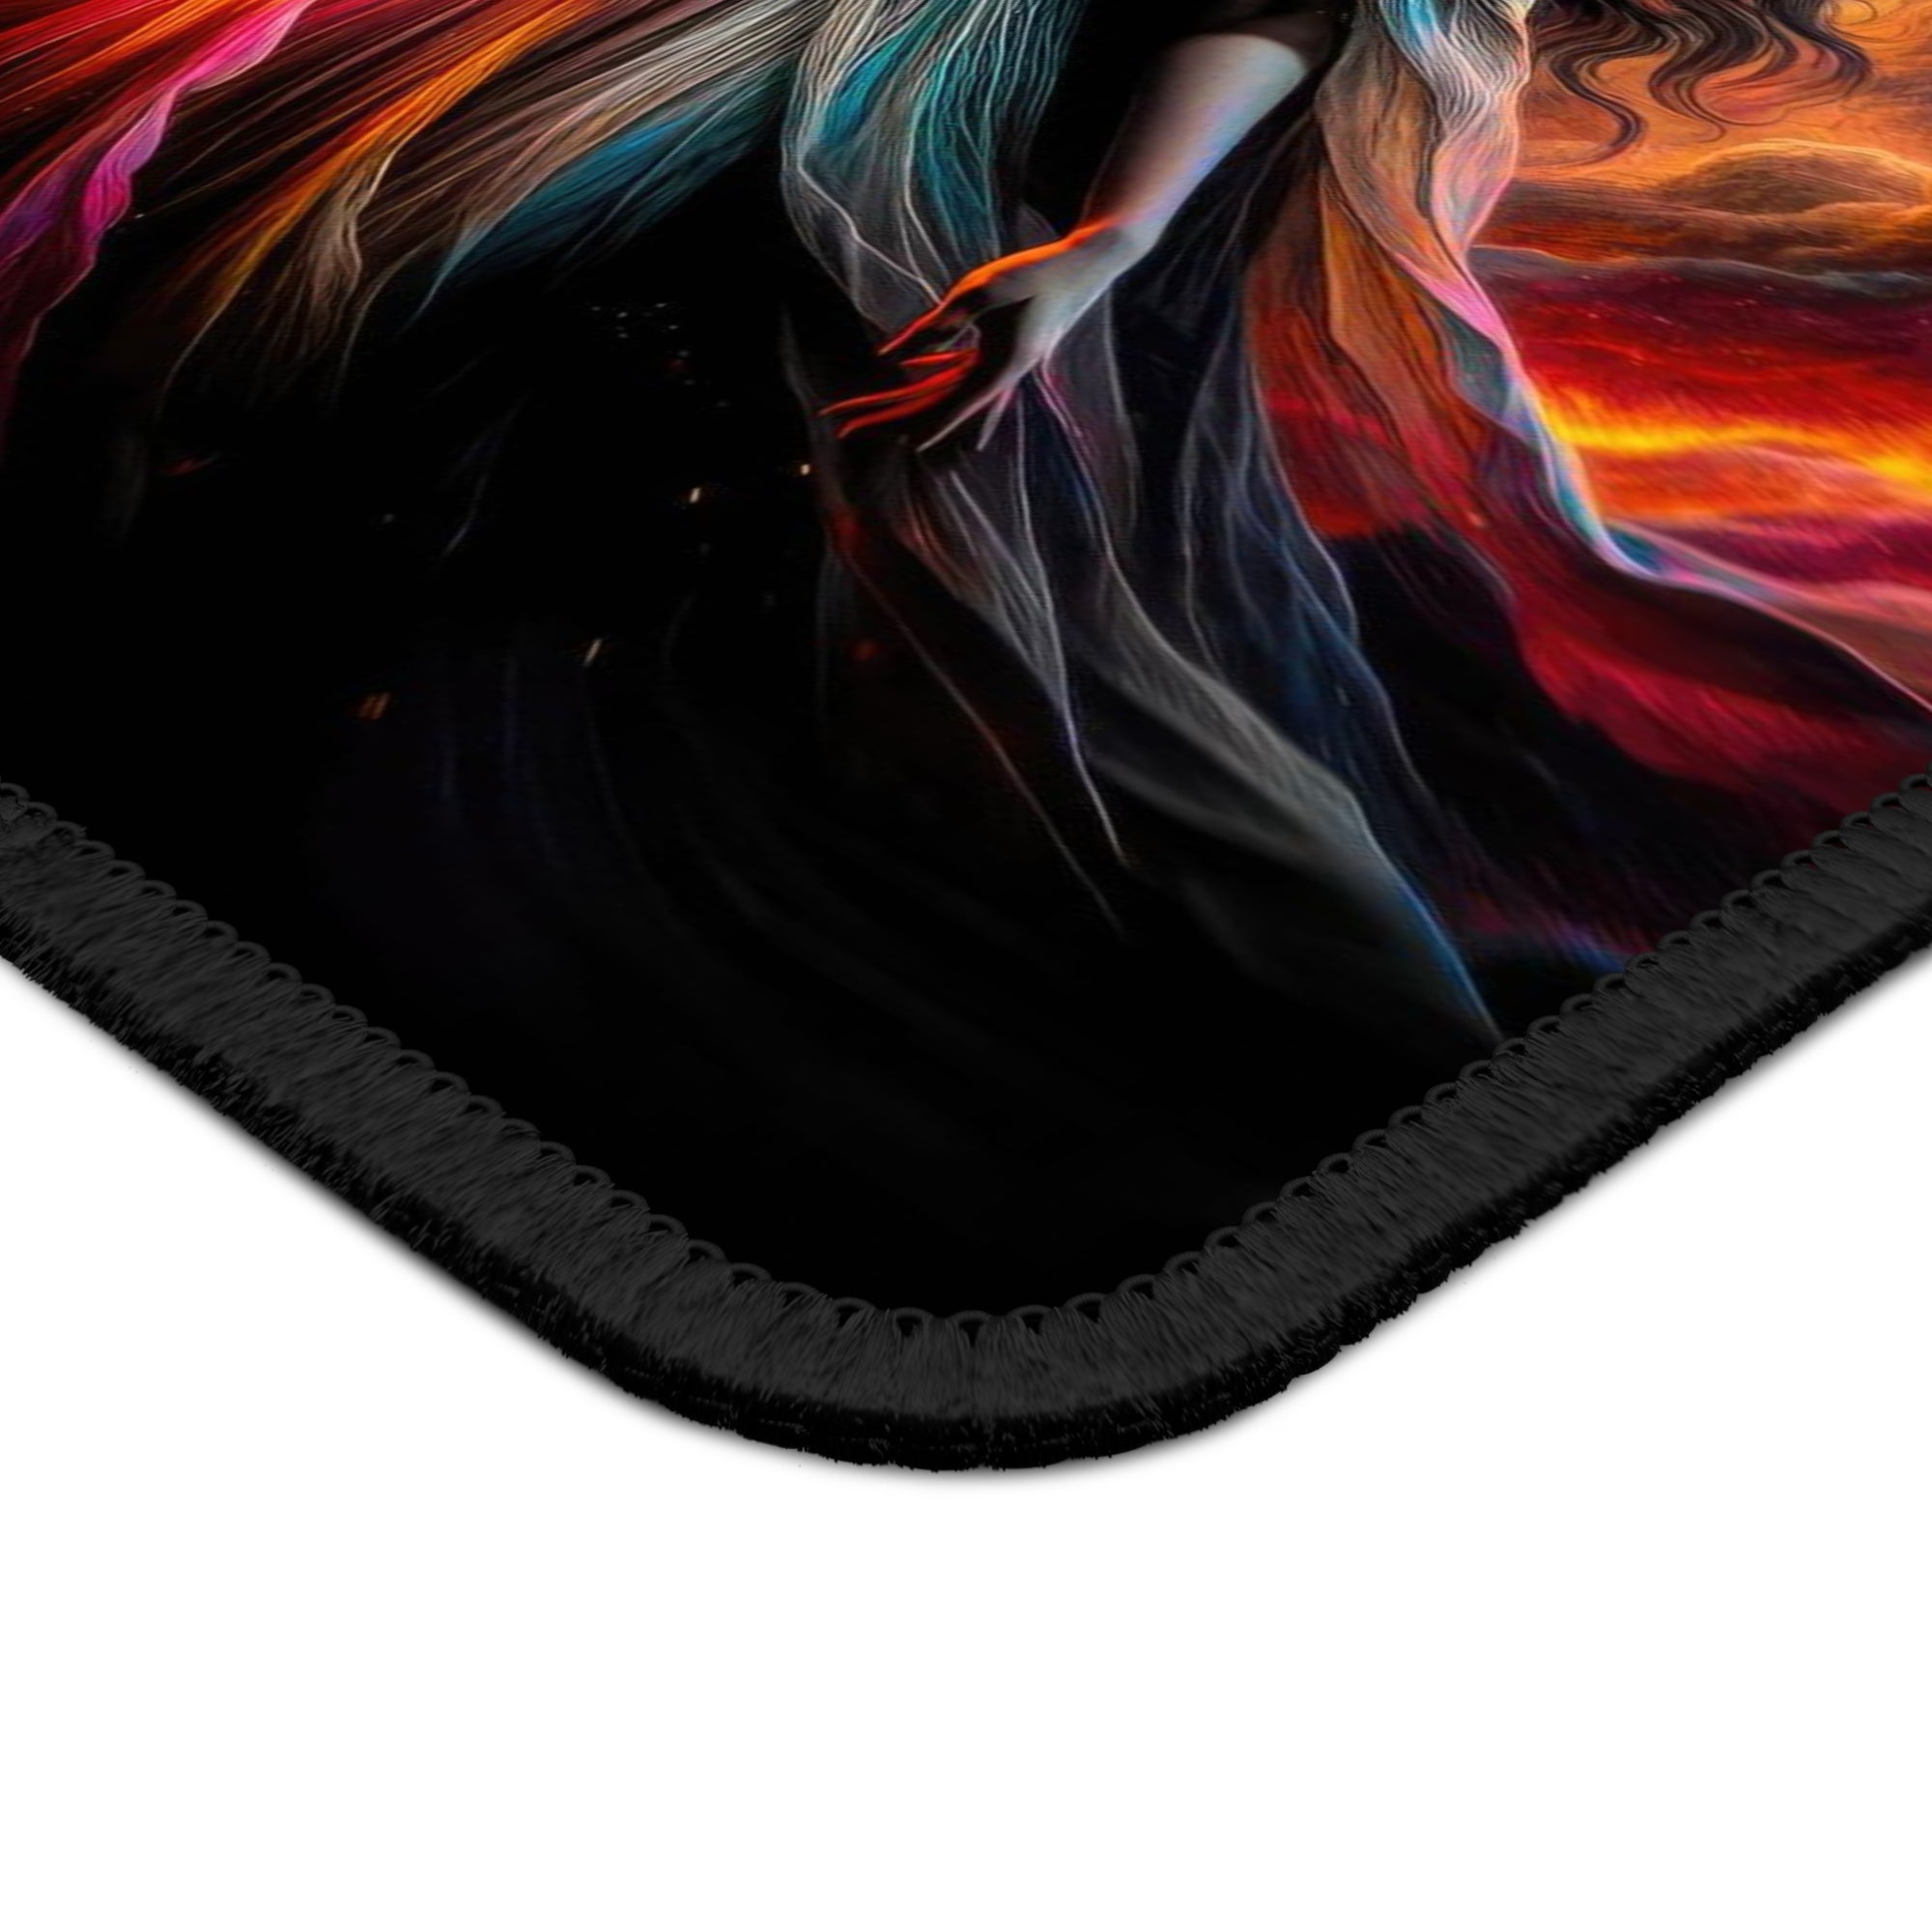 Eternal Embrace Gaming Mouse Pad